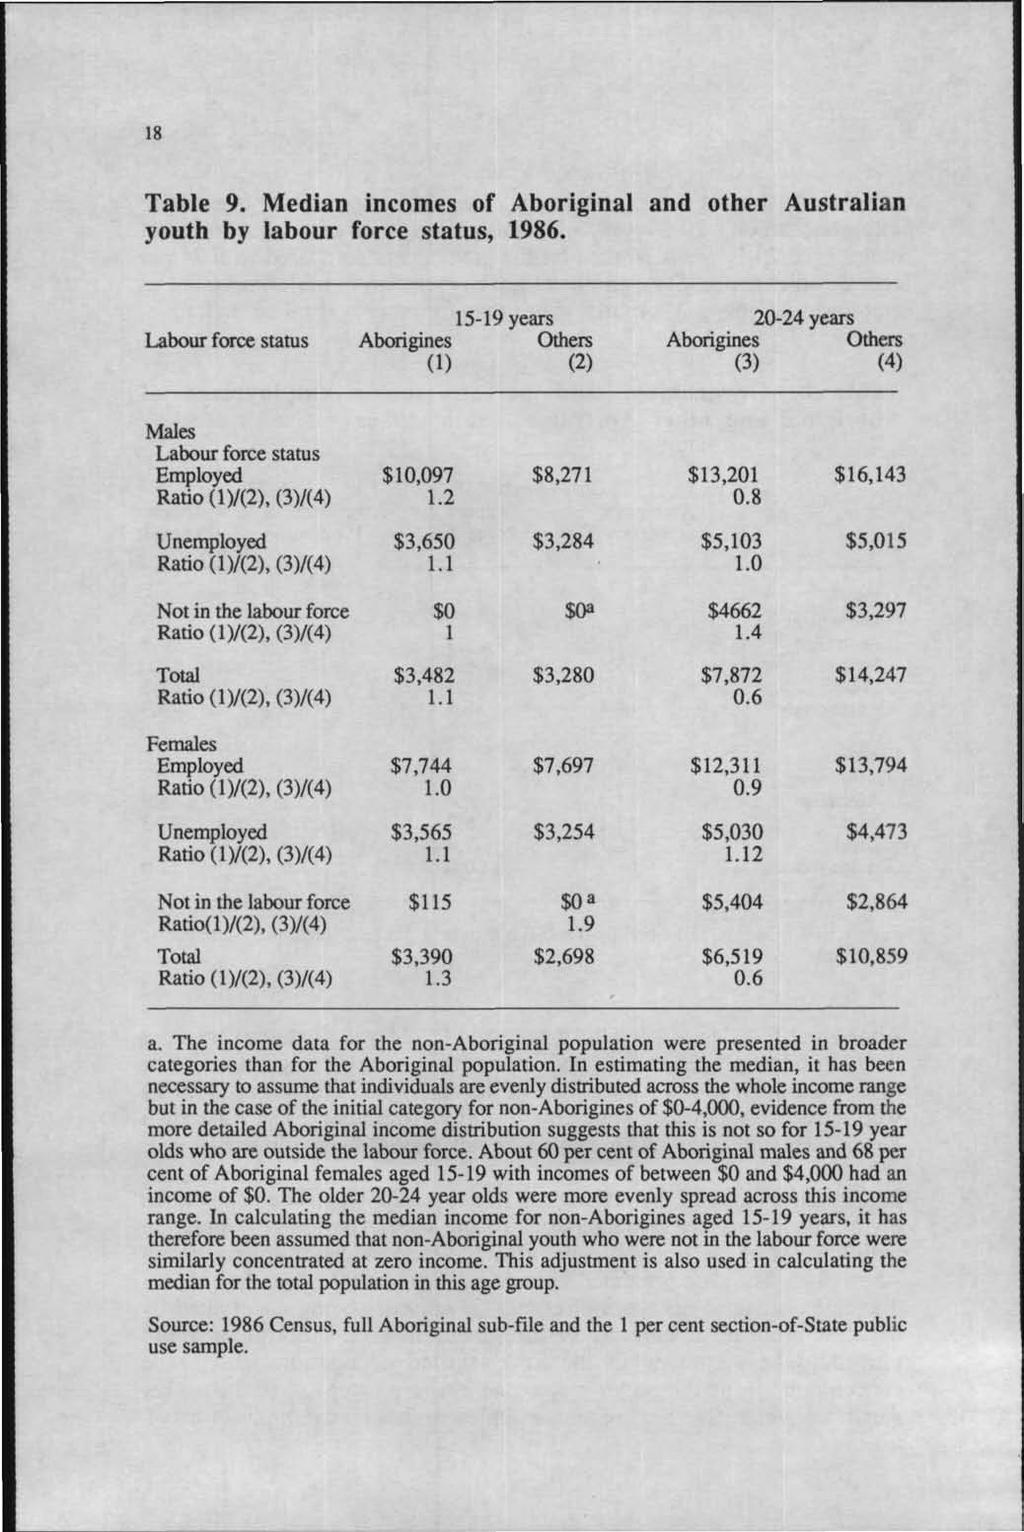 18 Table 9. Median incomes of Aboriginal and other Australian youth by labour force status, 1986.